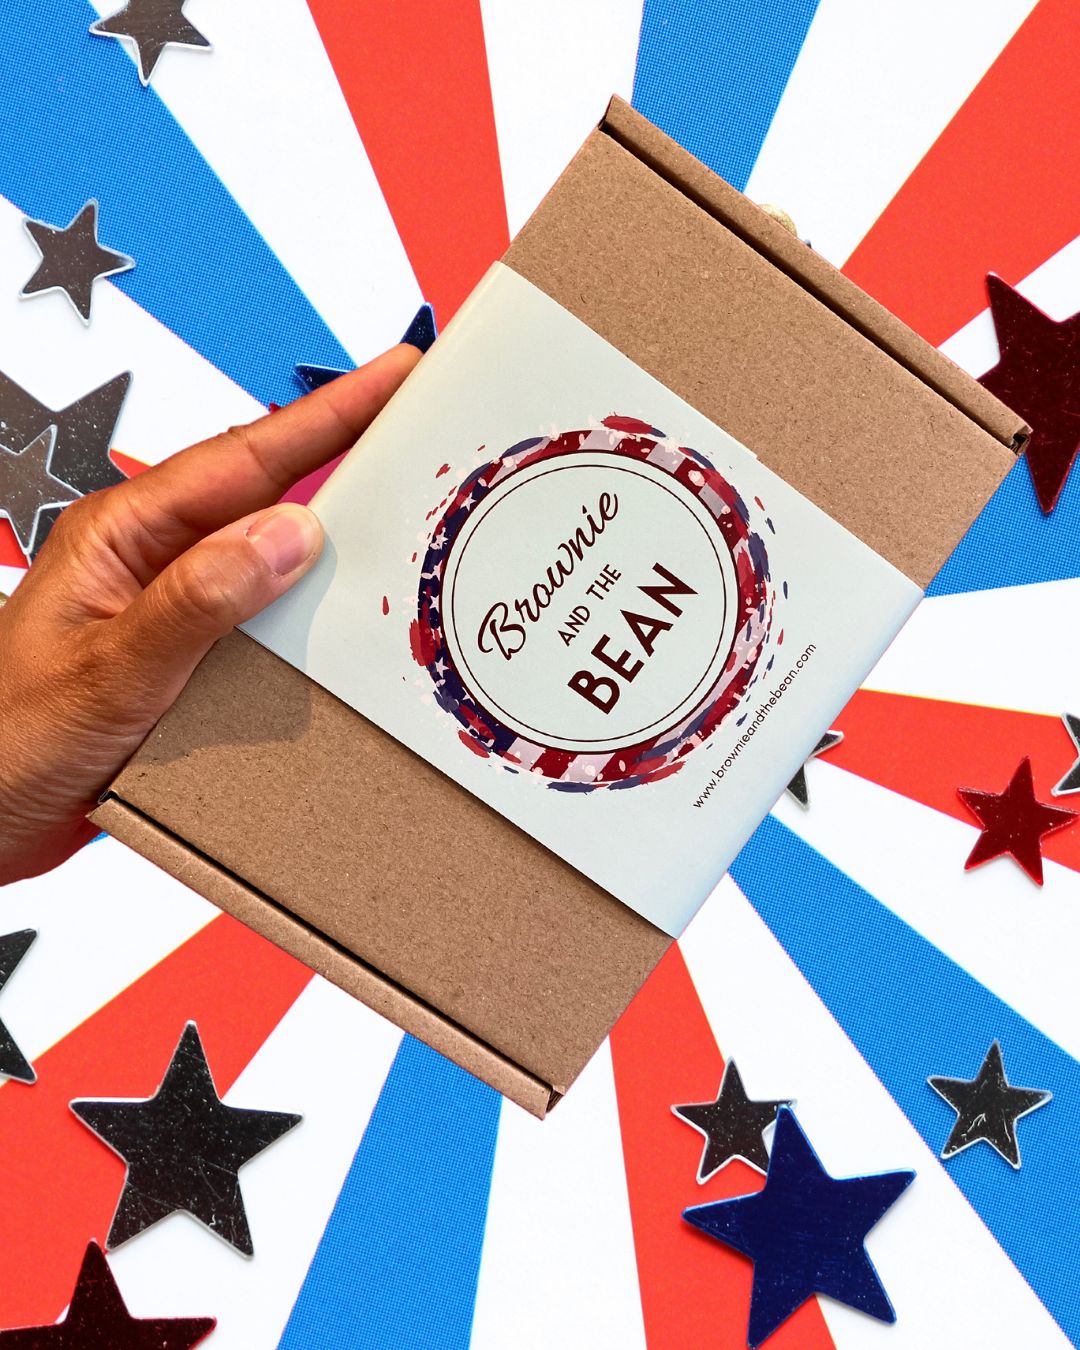 American themed background with red, white and blue strips emerging from the centre of the photo. There are stars placed sporadically around. In the centre of the image is a hand holiday an American themed brownie box. The box is Kraft, the strap is eau de nil and there is an American flag in the shape of a circle, behind the eau de nil Brownie and the Bean logo.